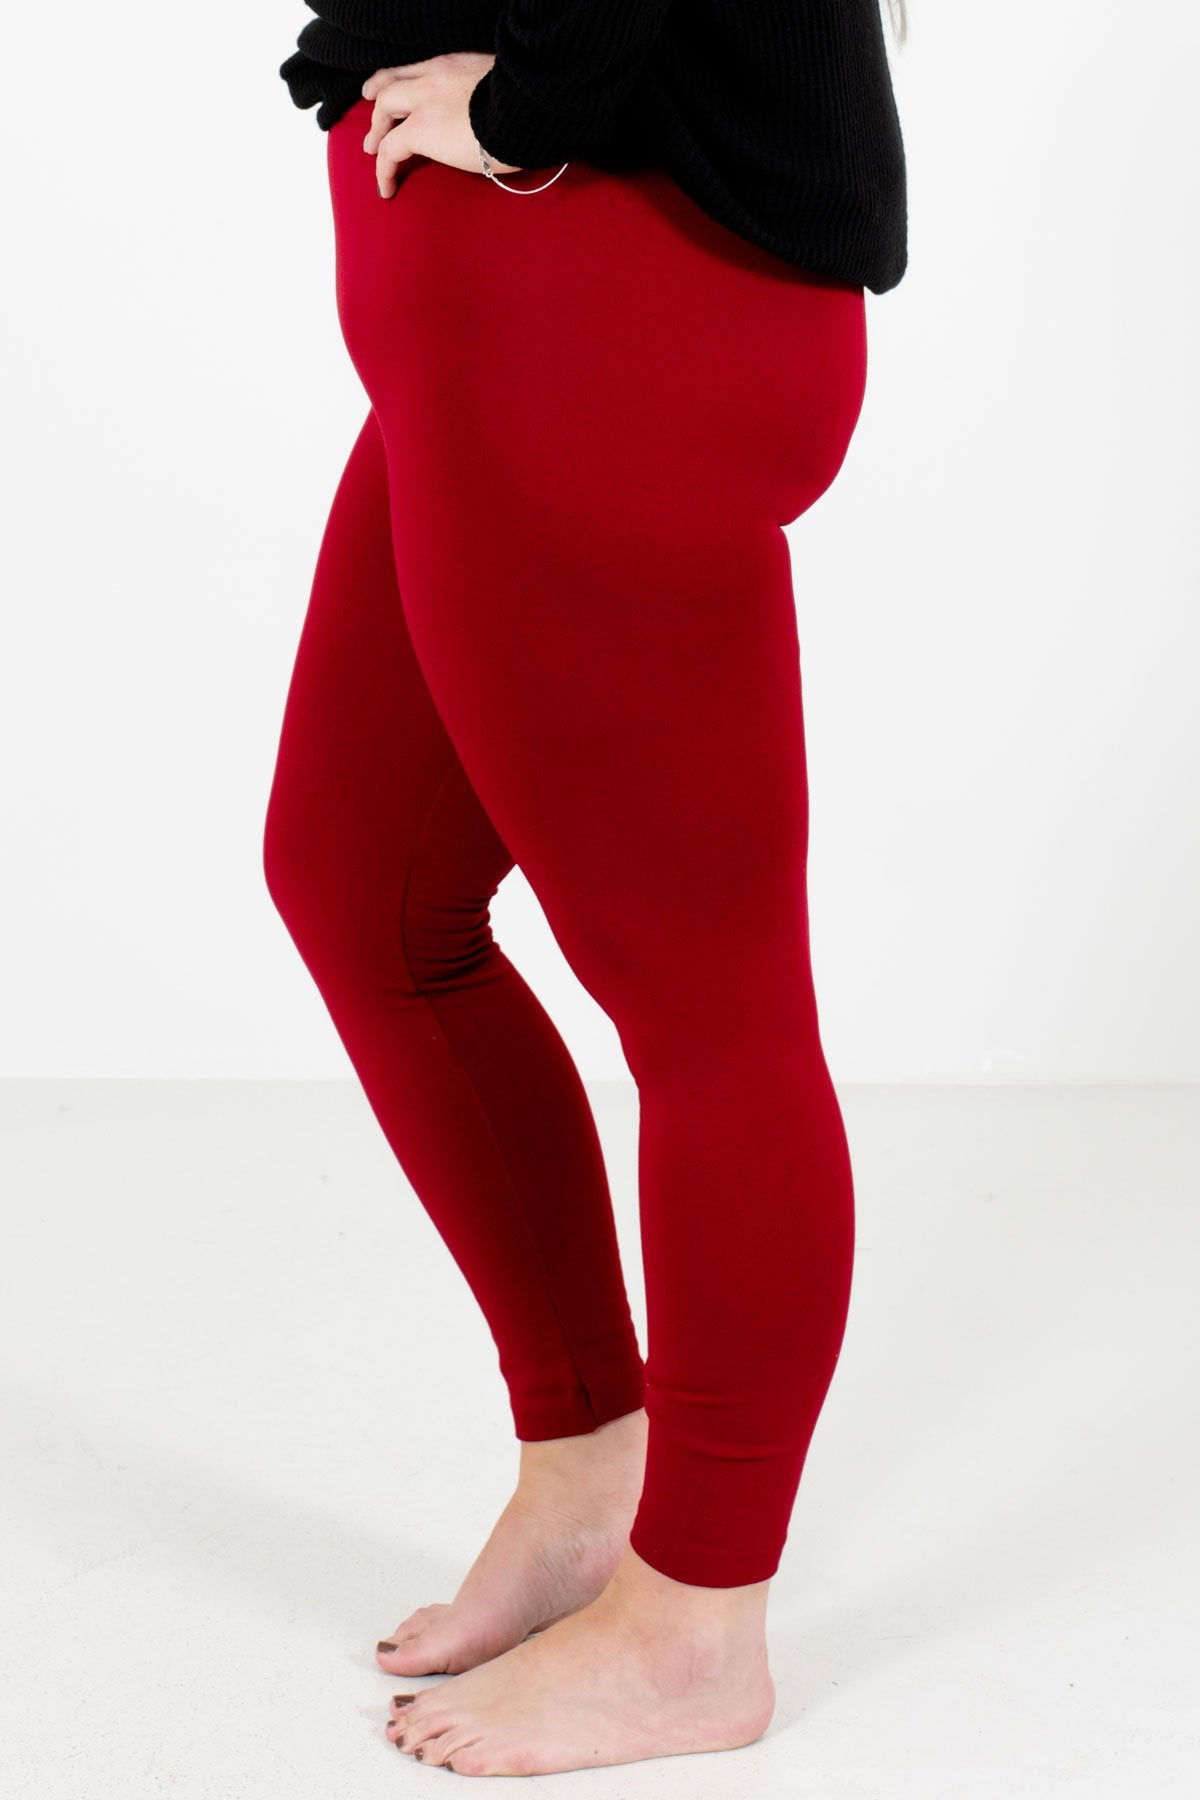 Red High-Quality Stretchy Boutique Leggings for Women